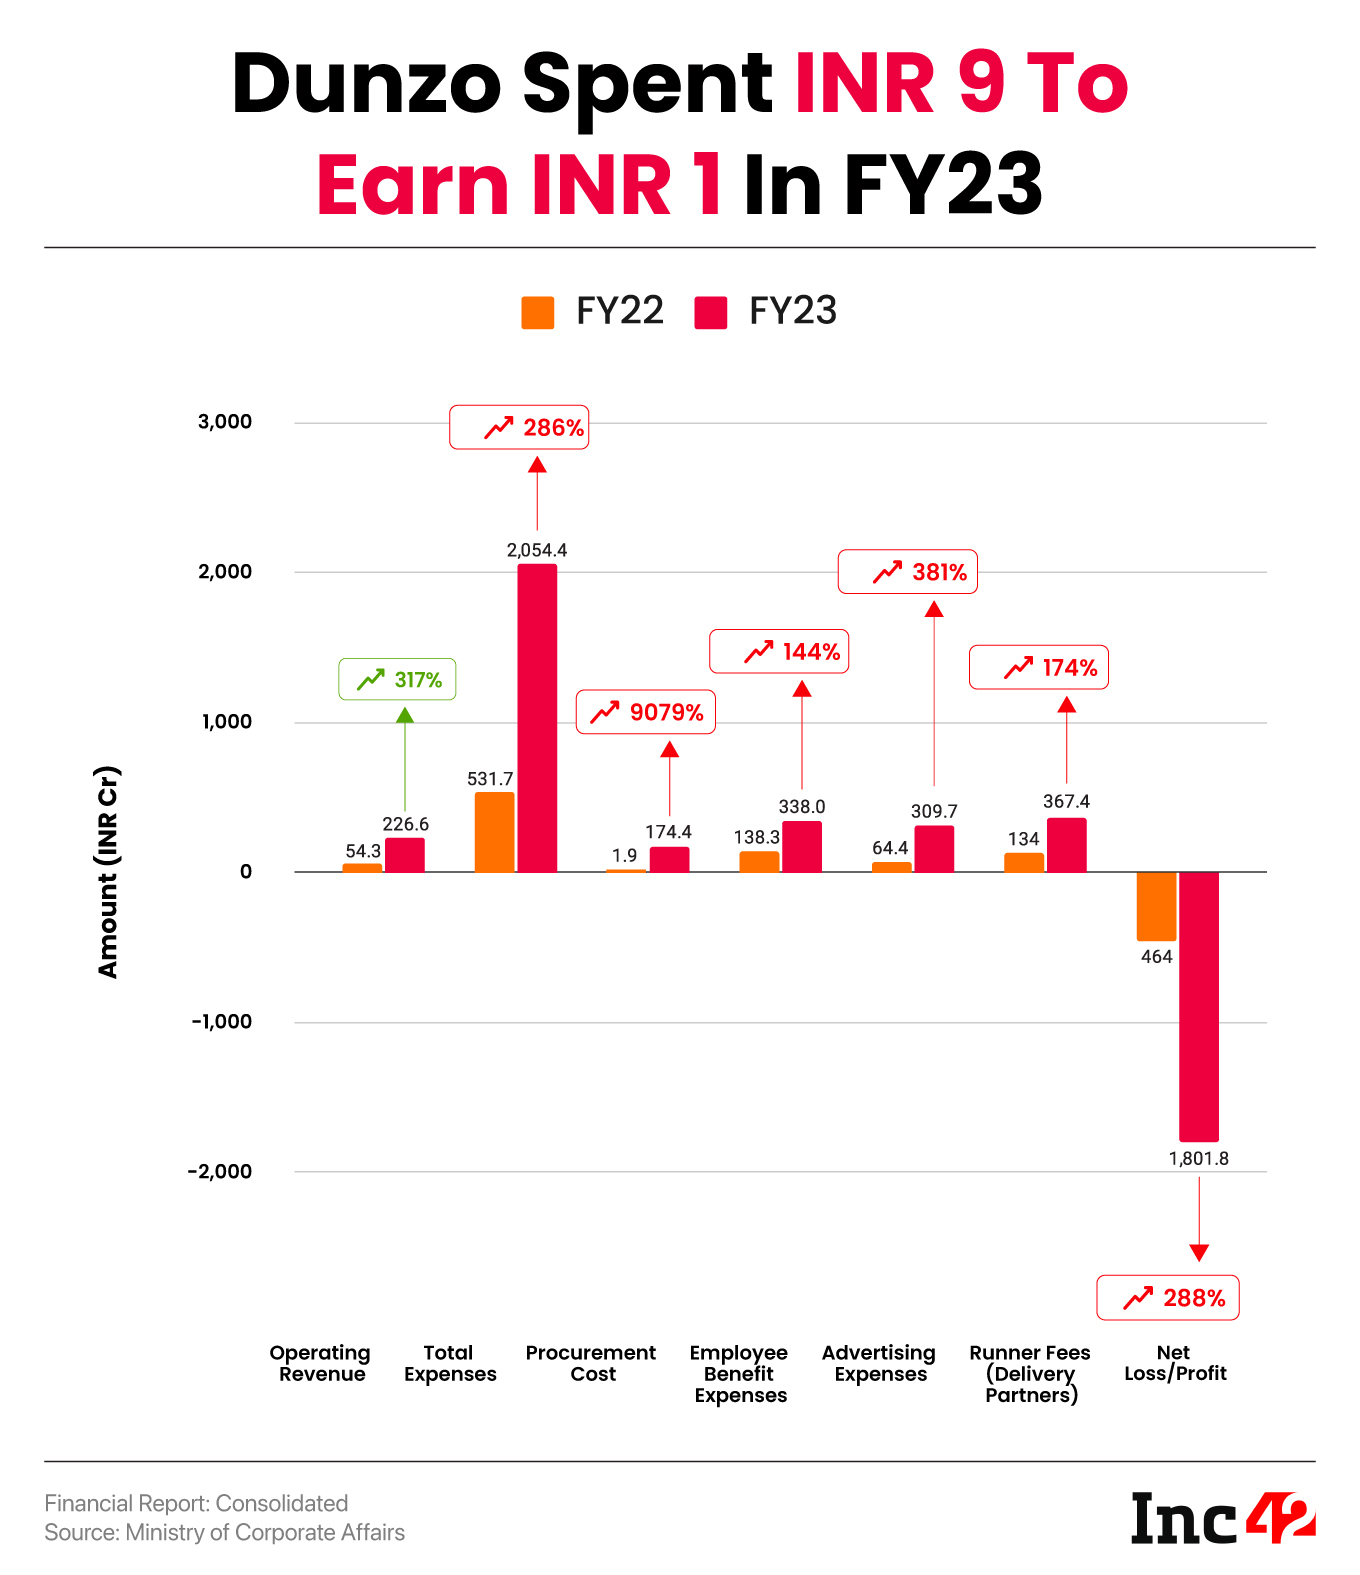 Dunzo Spent INR 9 To Earn Every Single Rupee From Operations In FY23